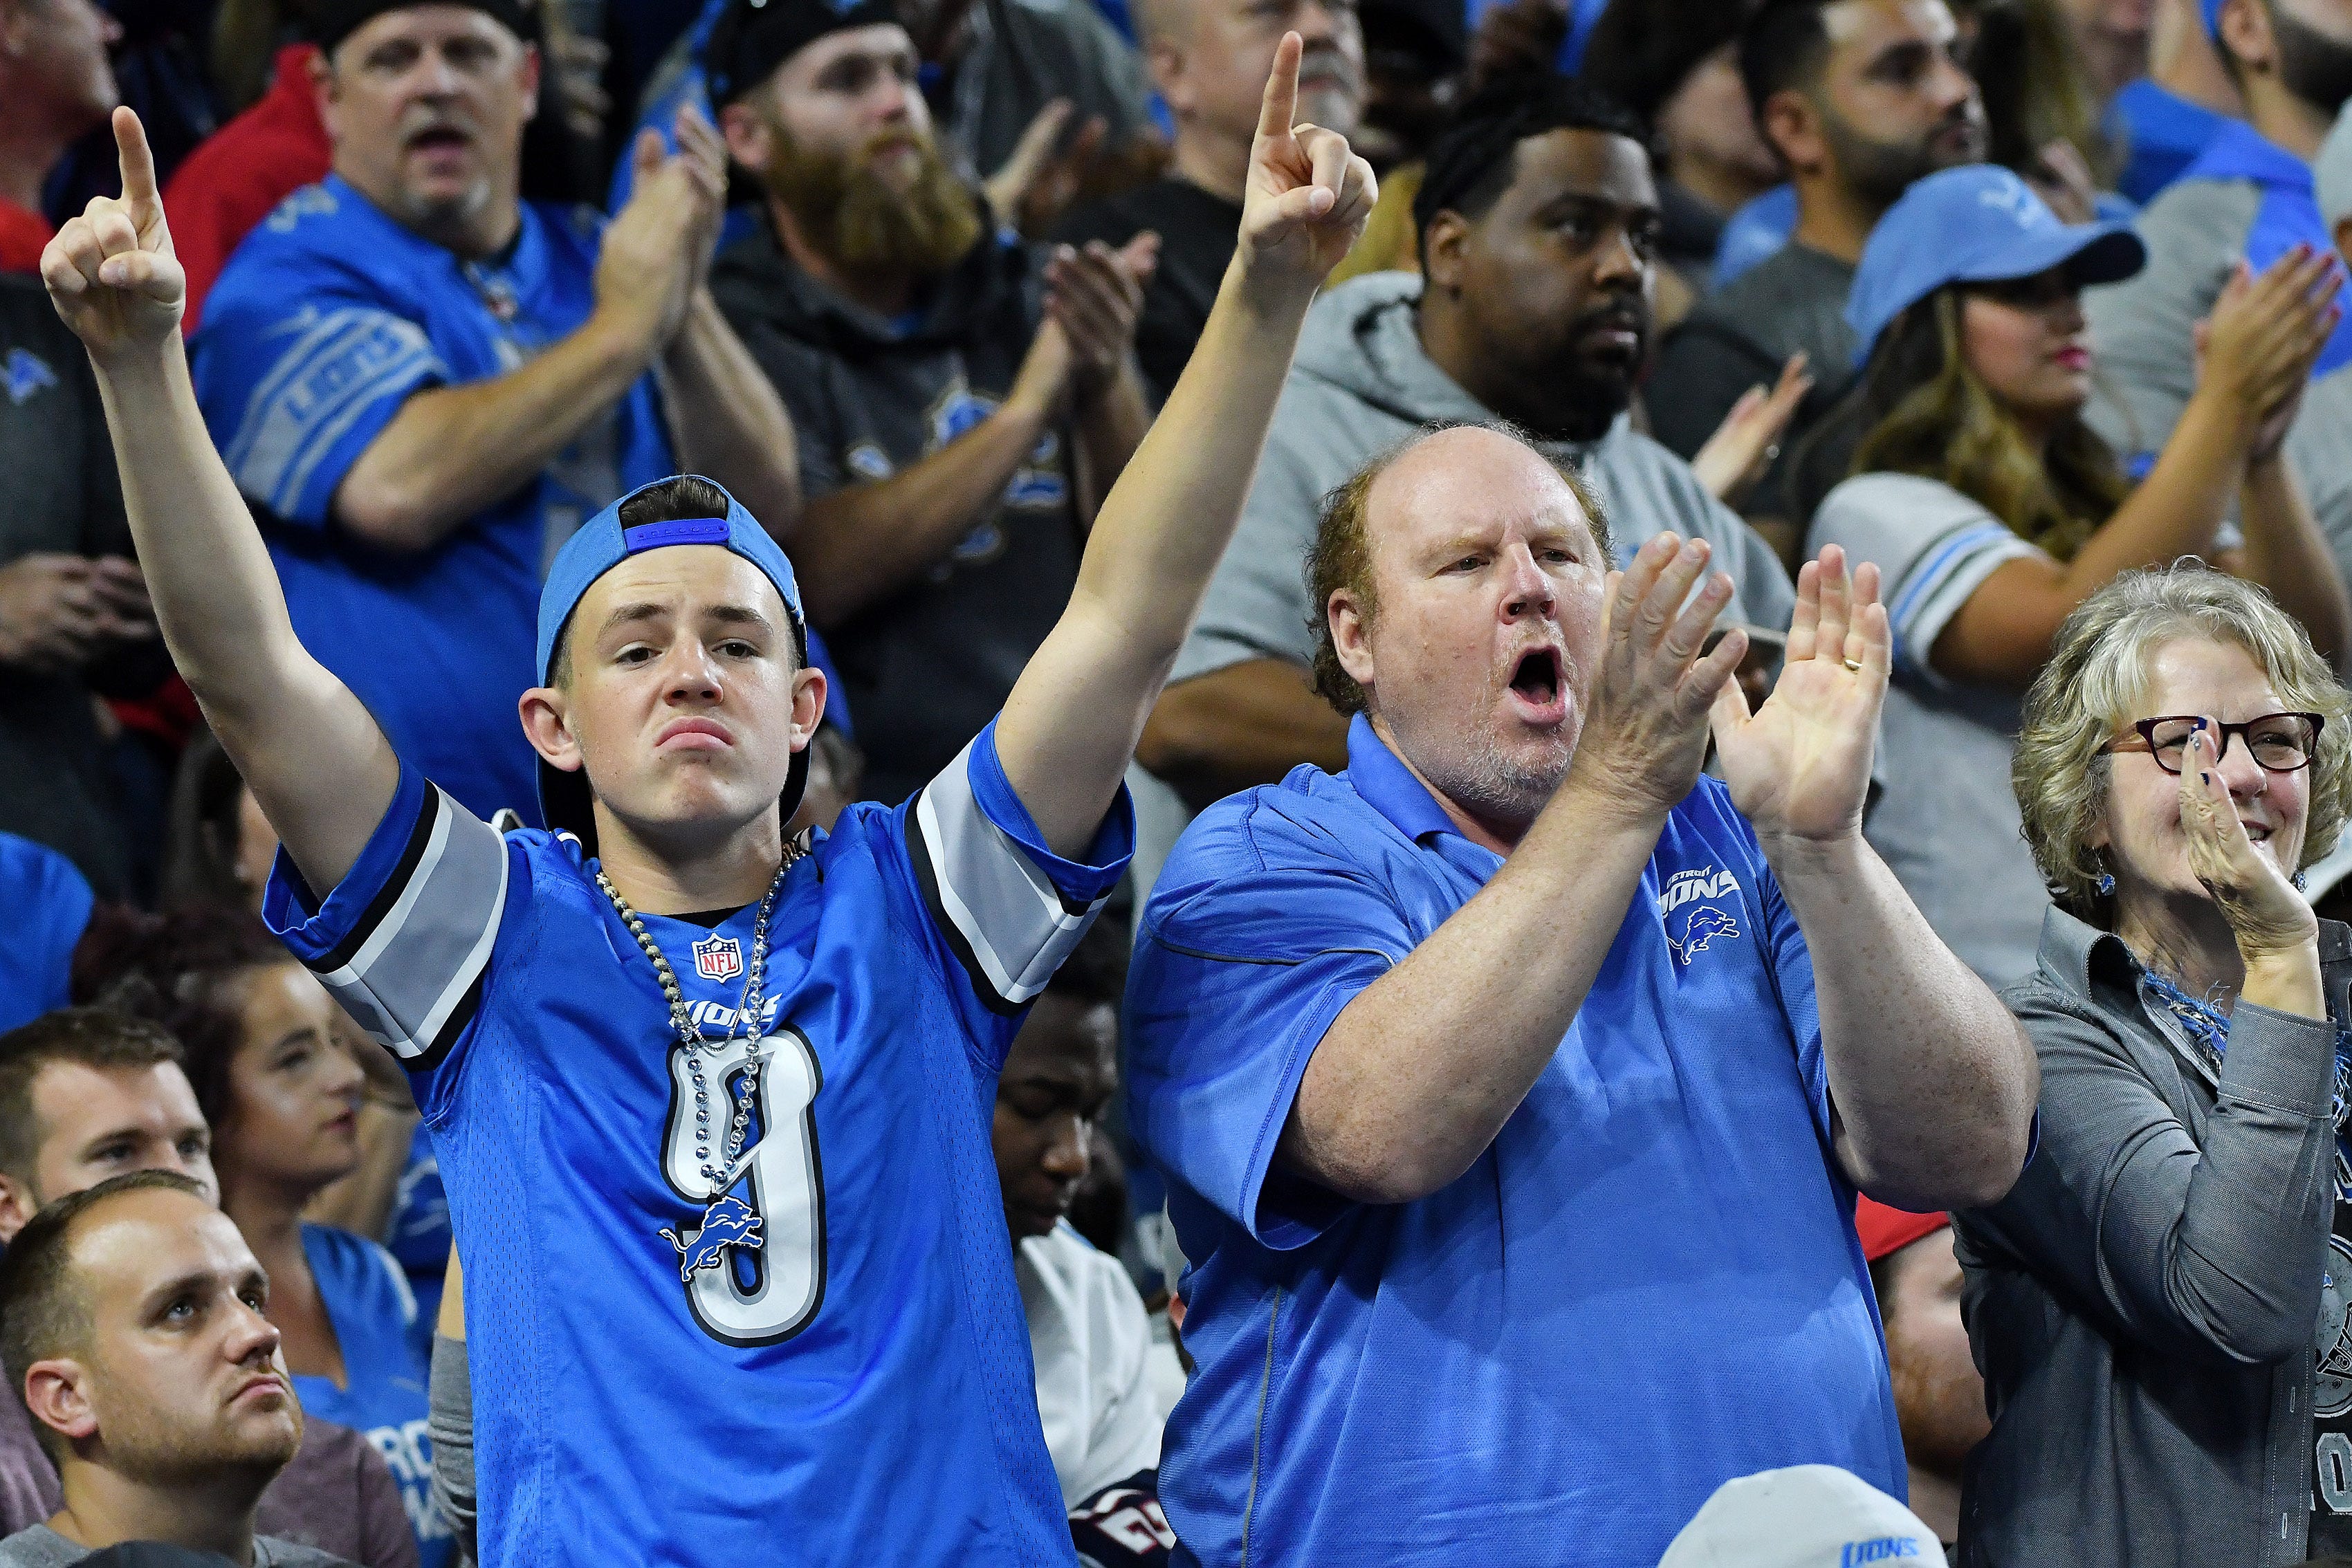 Lions fans cheer after the play in the second quarter is ruled a touchdown after review.